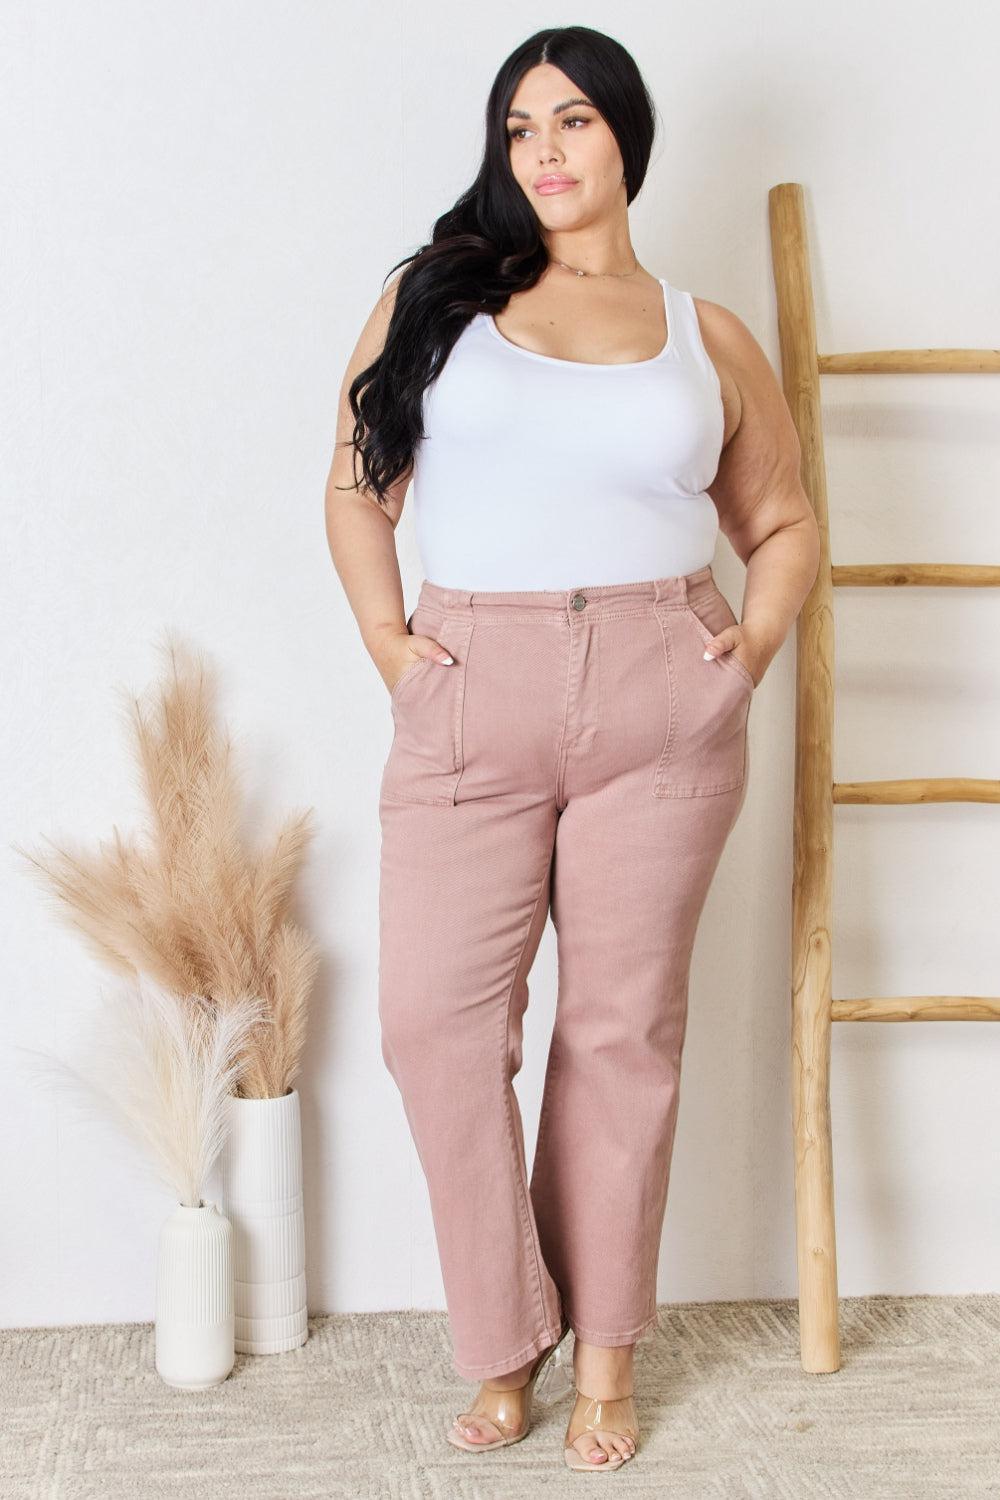 a woman in a white tank top and pink pants